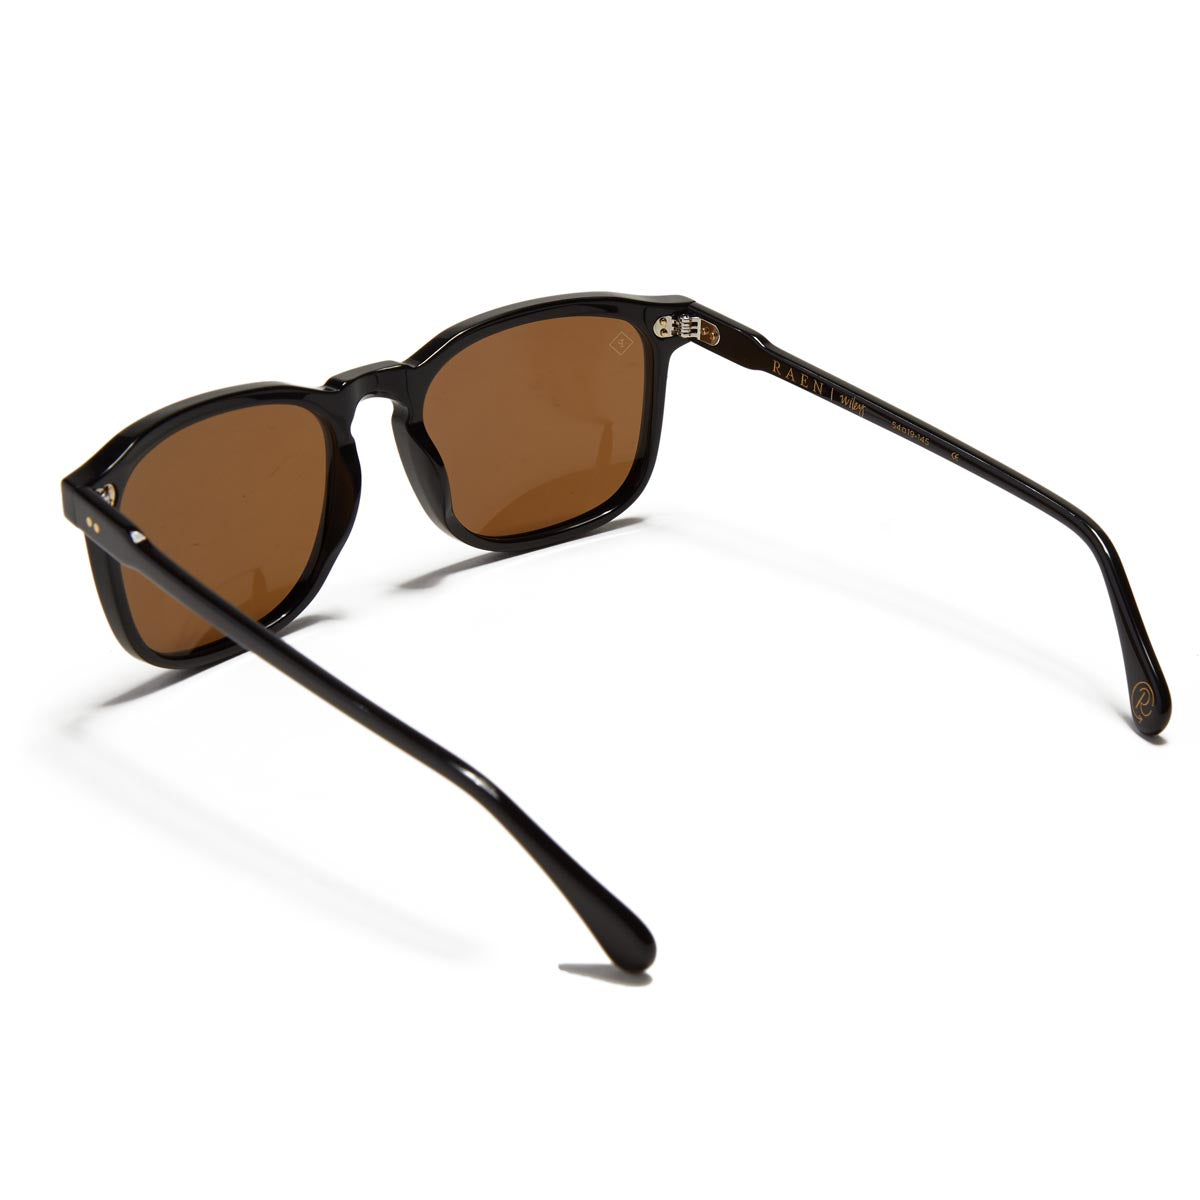 Raen Wiley 54 Sunglasses - Recycled Black/Vibrant Browm image 2